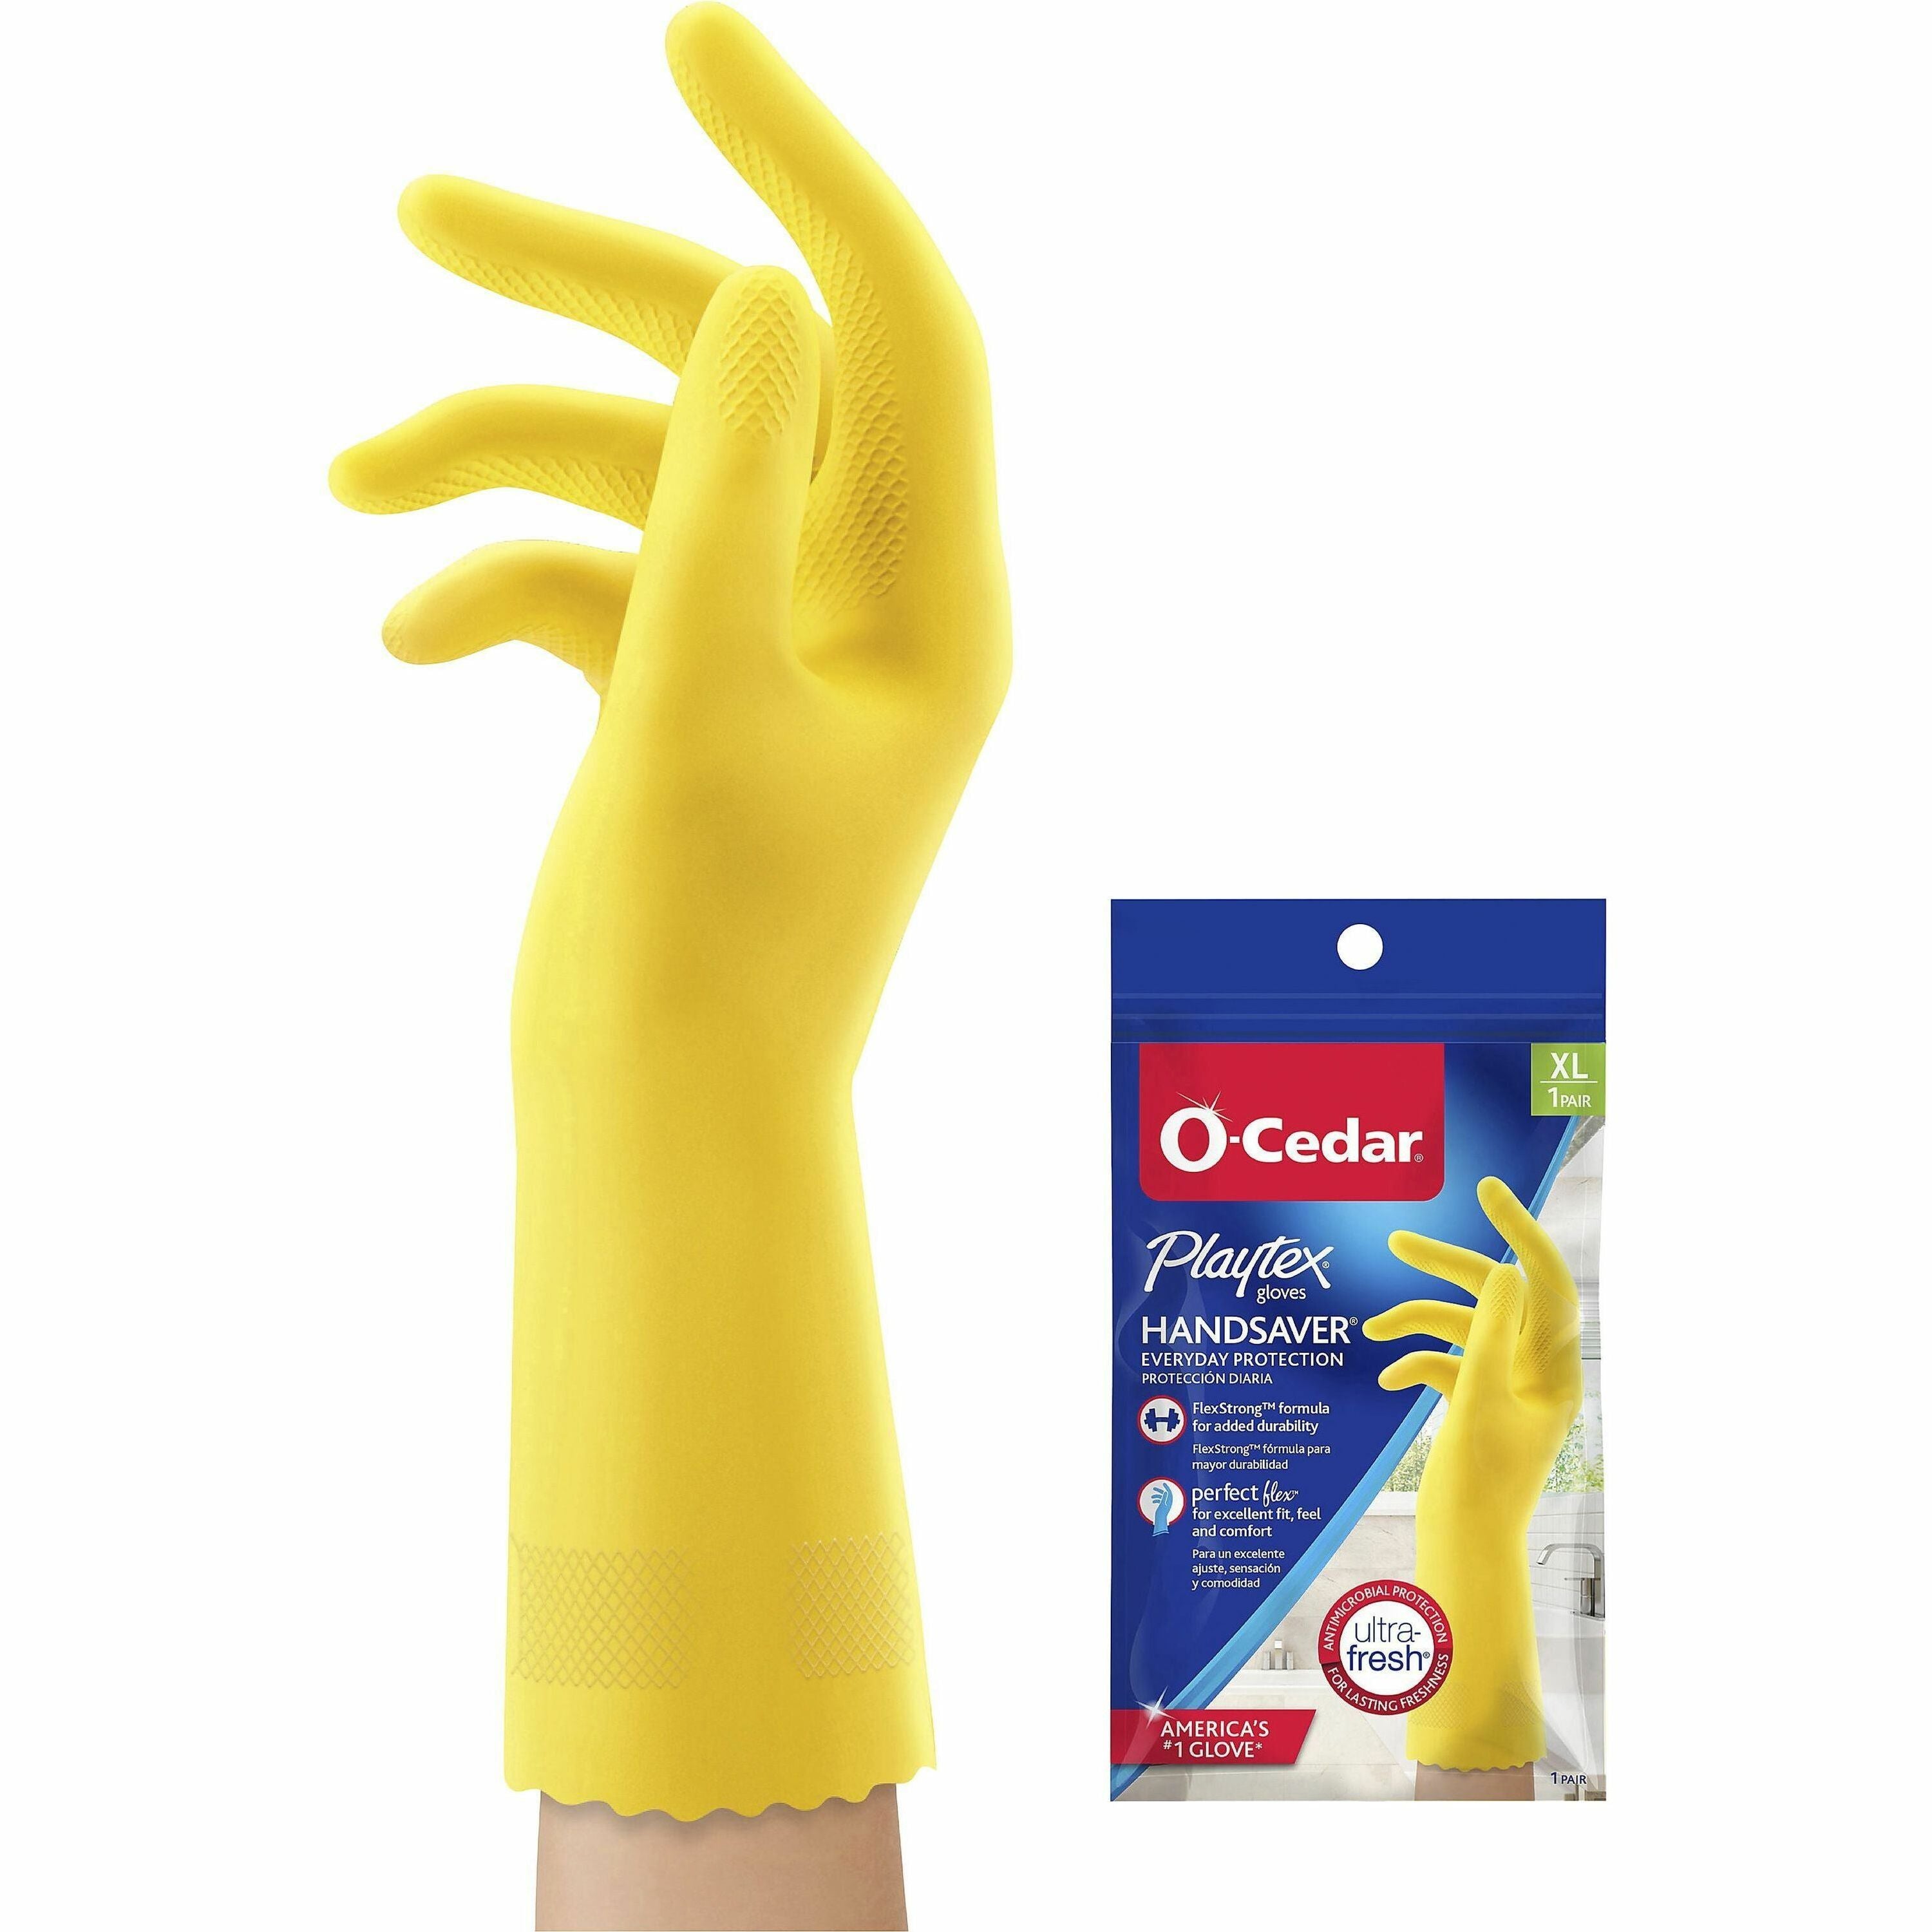 O-Cedar Playtex Handsaver Gloves - Hot Water, Chemical Protection - X-Large Size - Latex, Nitrile, Neoprene - Yellow - Long Lasting, Durable, Anti-microbial, Odor Resistant, Comfortable, Textured Fingertip, Textured Palm, Reusable - For Household - 2